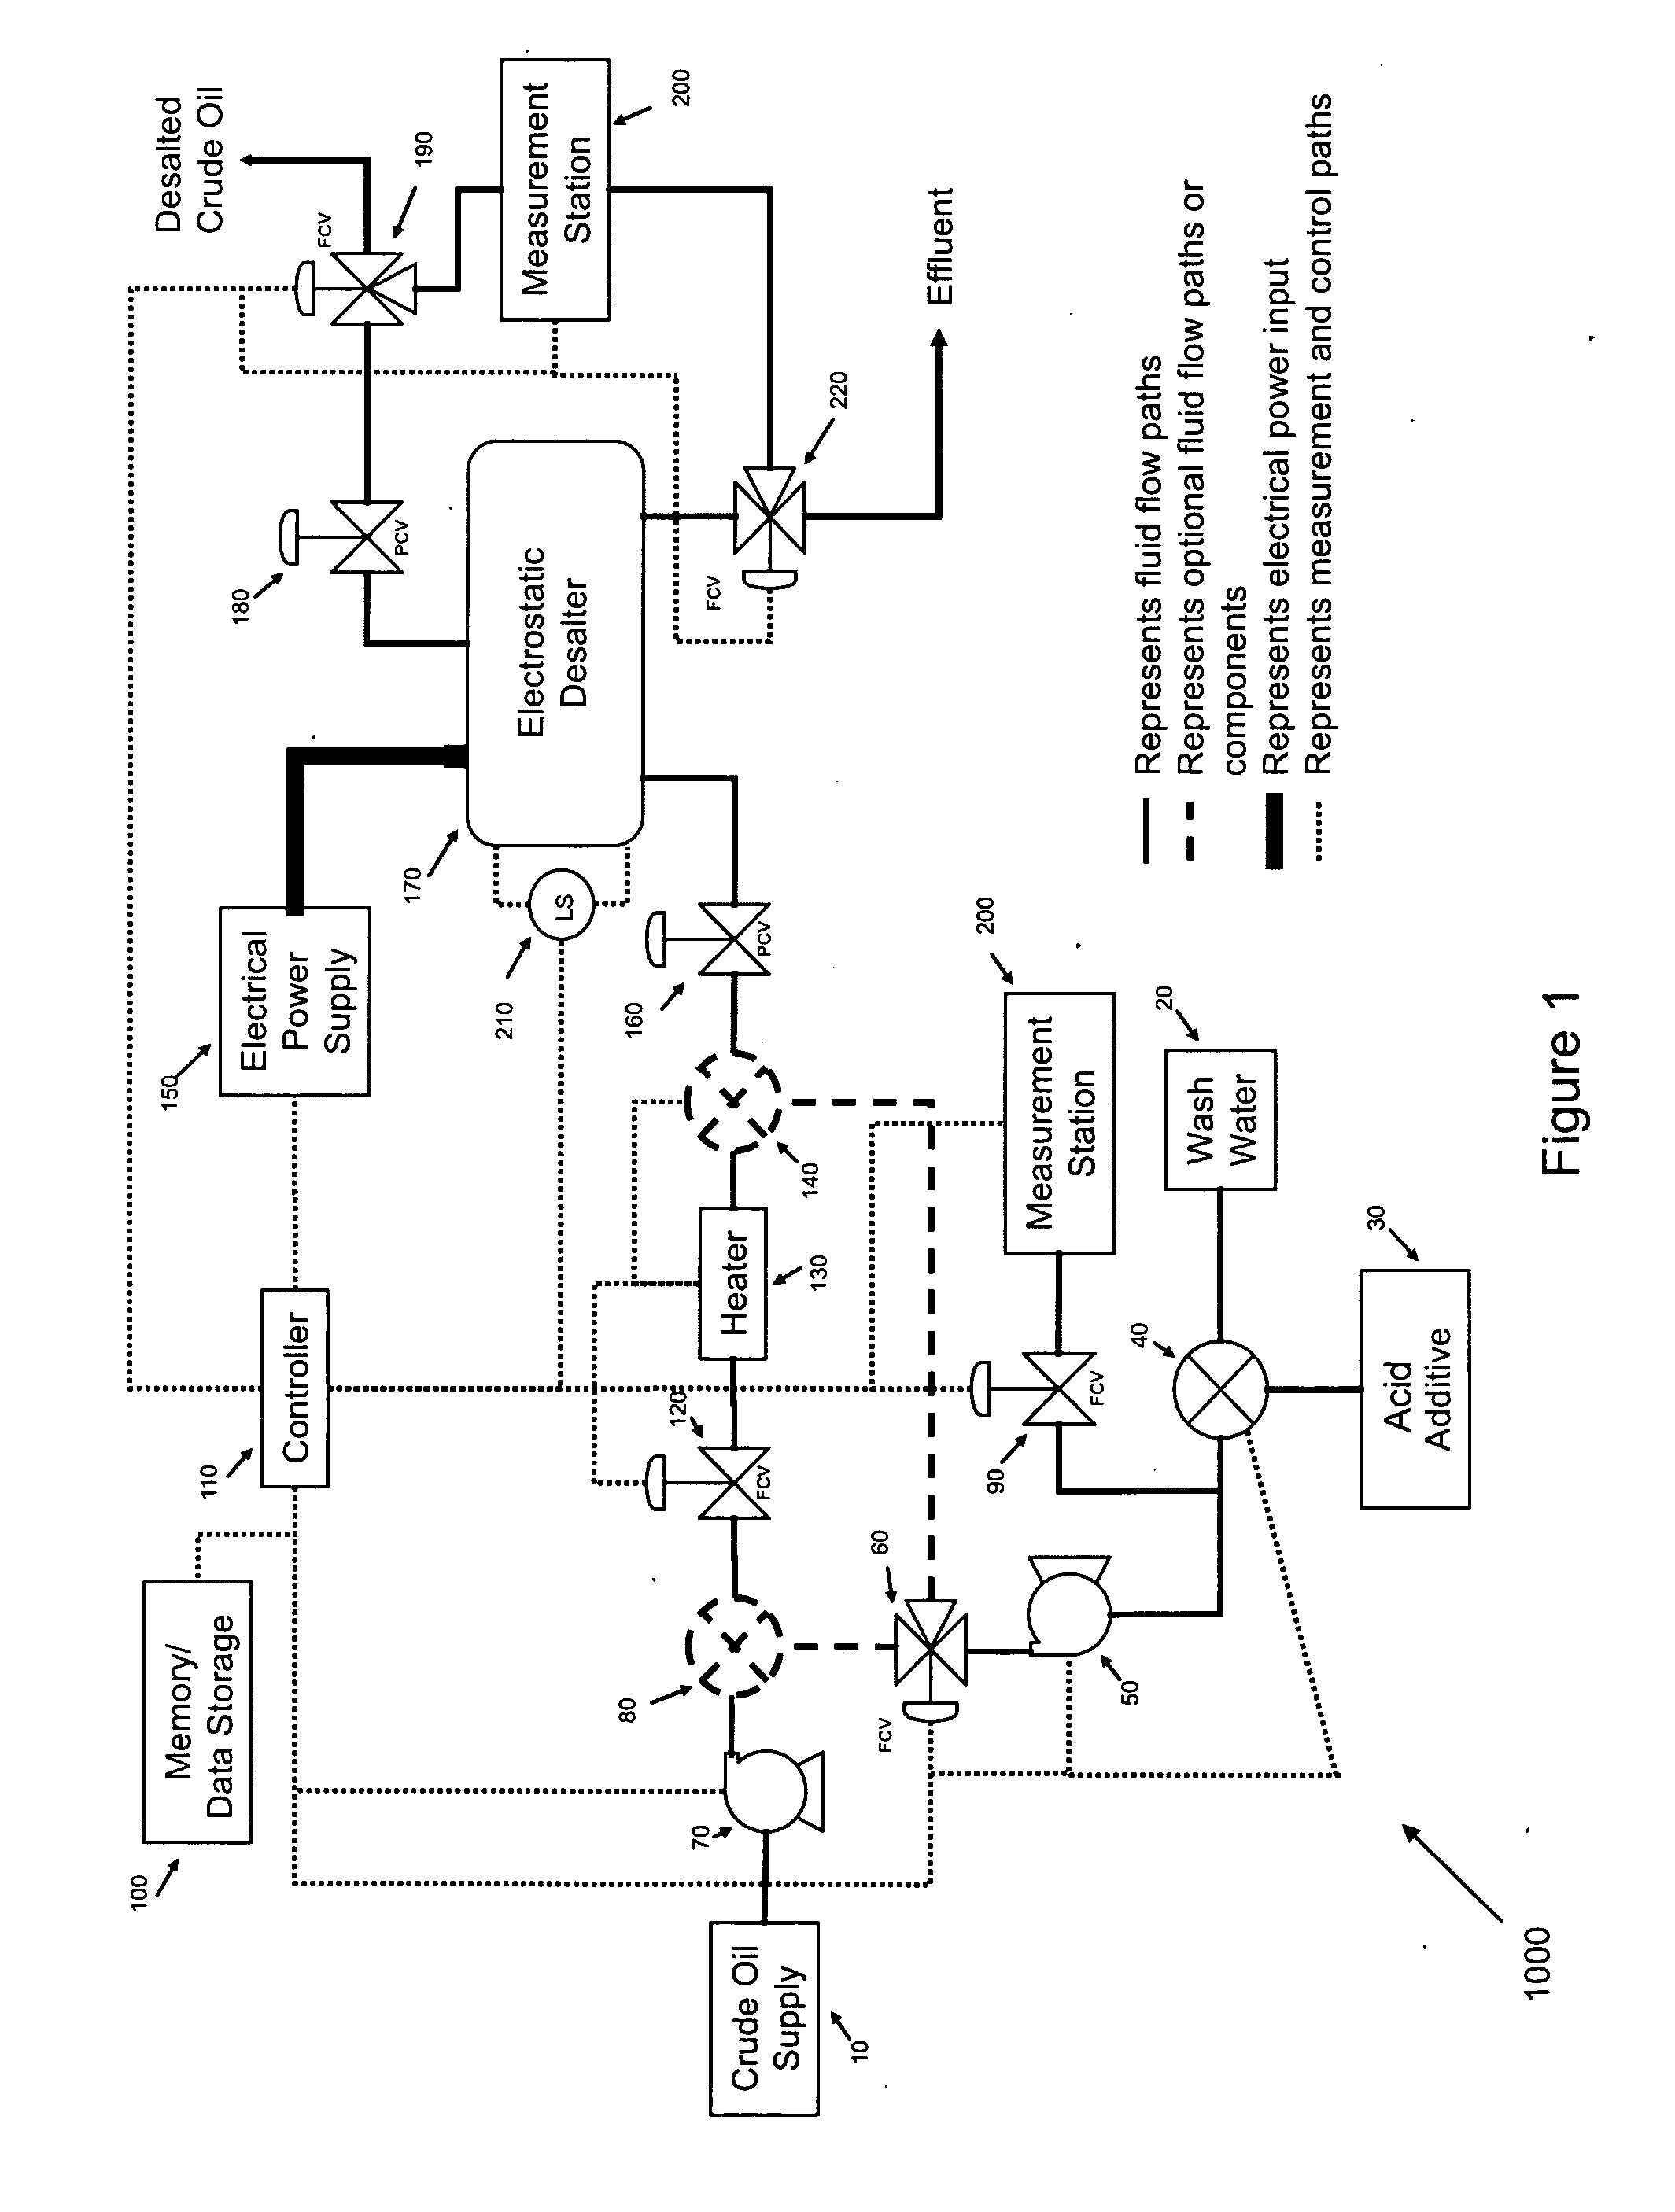 Method and device for automated control of enhanced metal and amine removal from crude oil